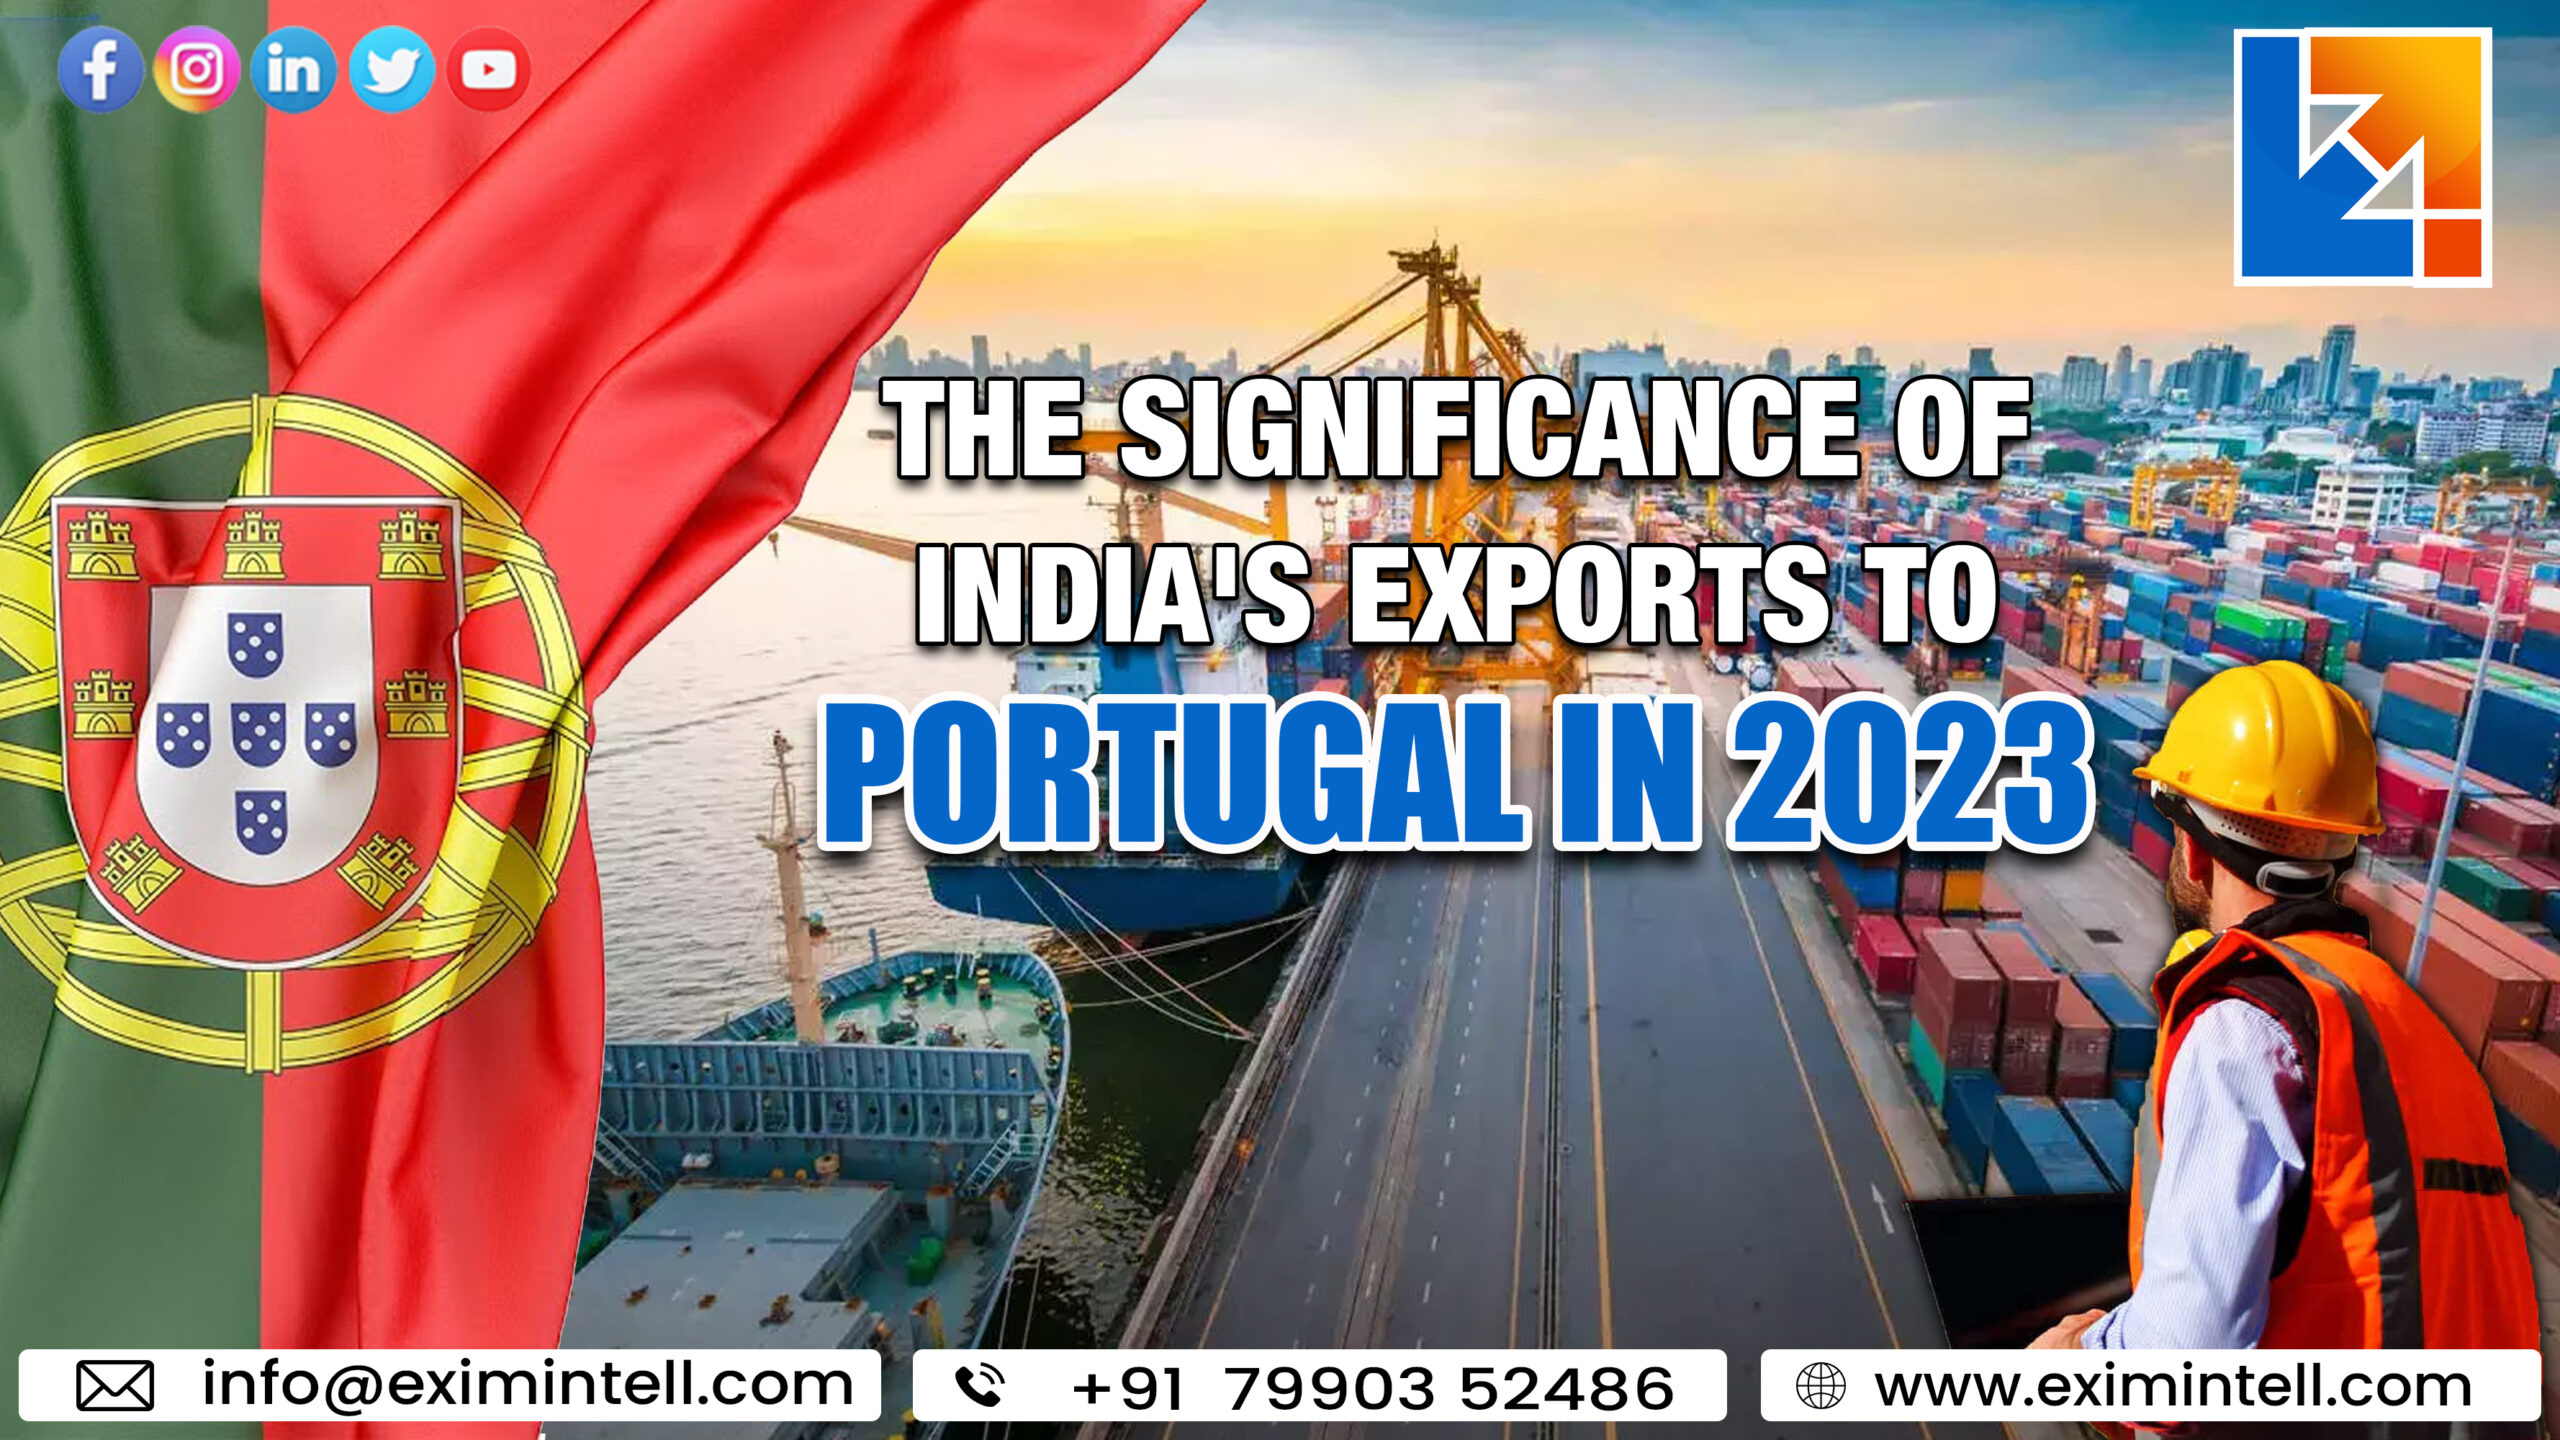 The Significance of India’s Exports to Portugal in 2023